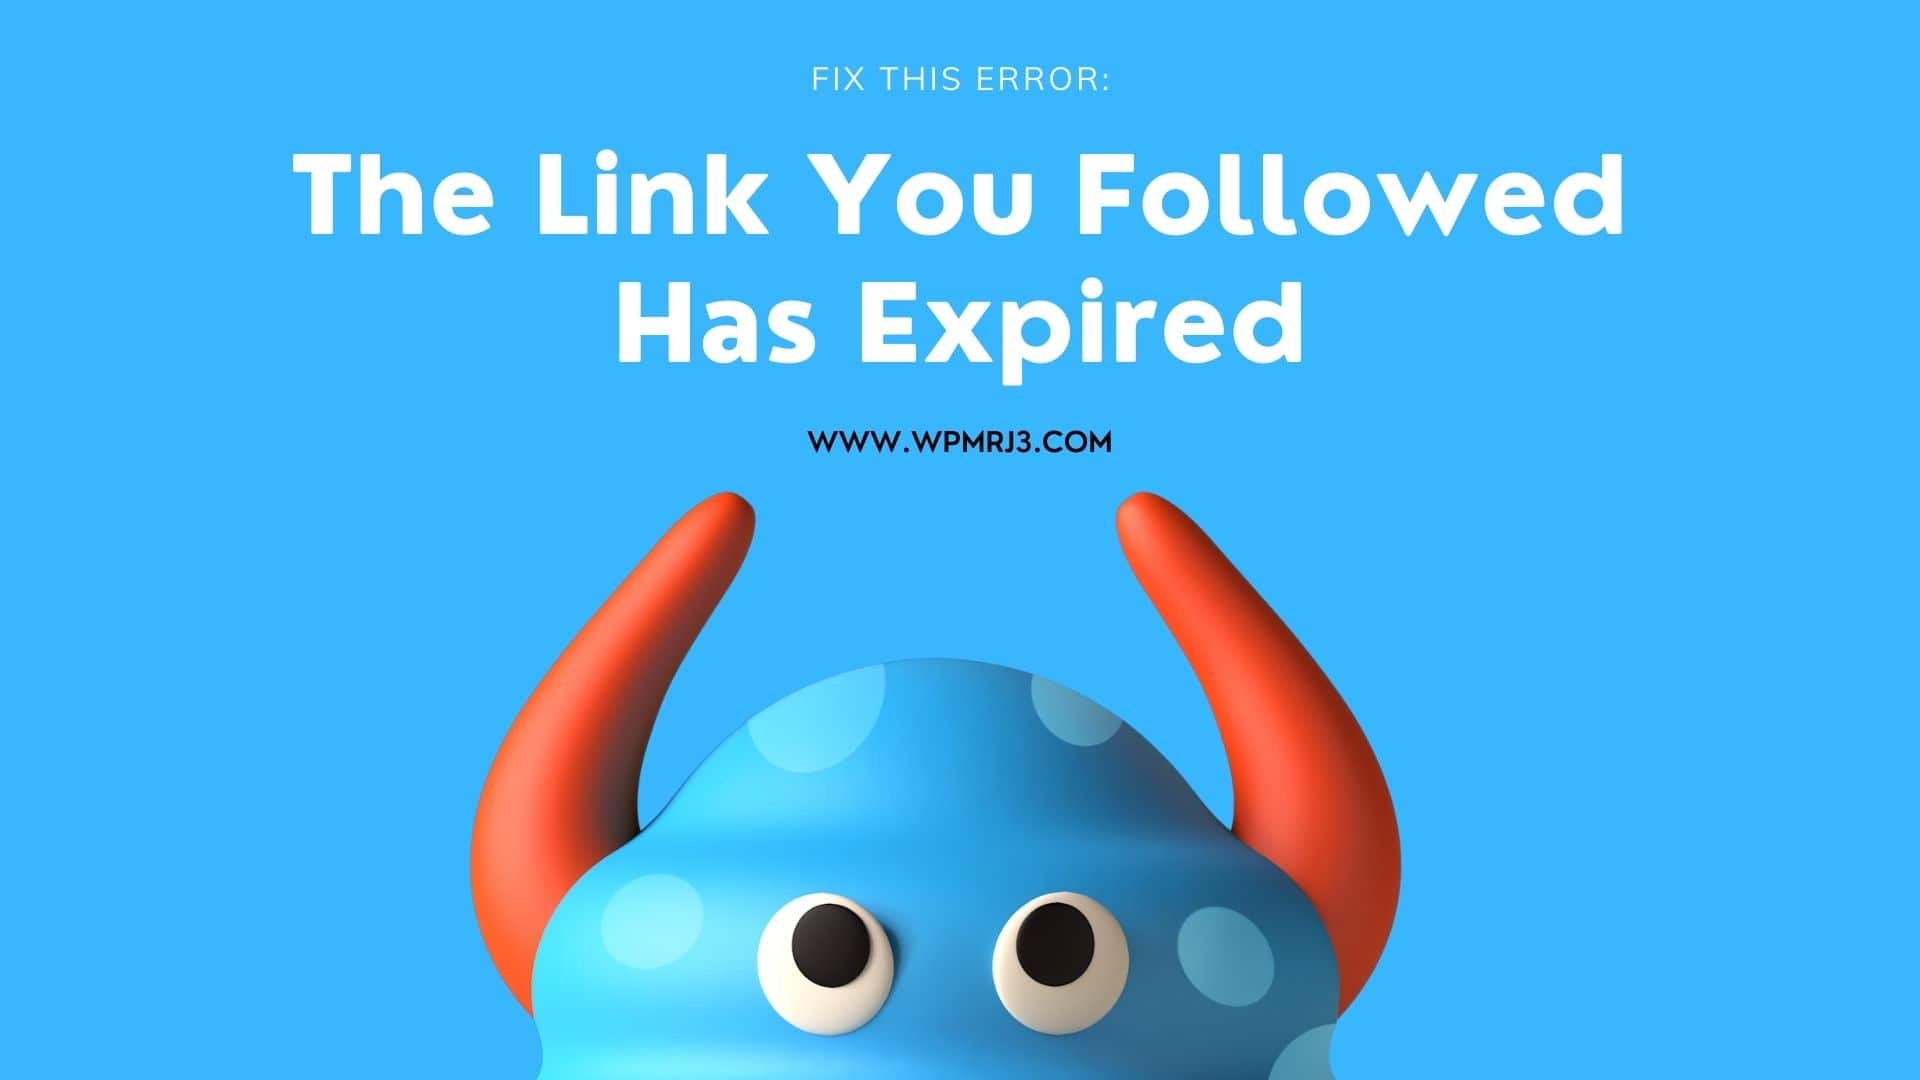 How To Fix ‘The Link You Followed Has Expired’ Error In WordPress